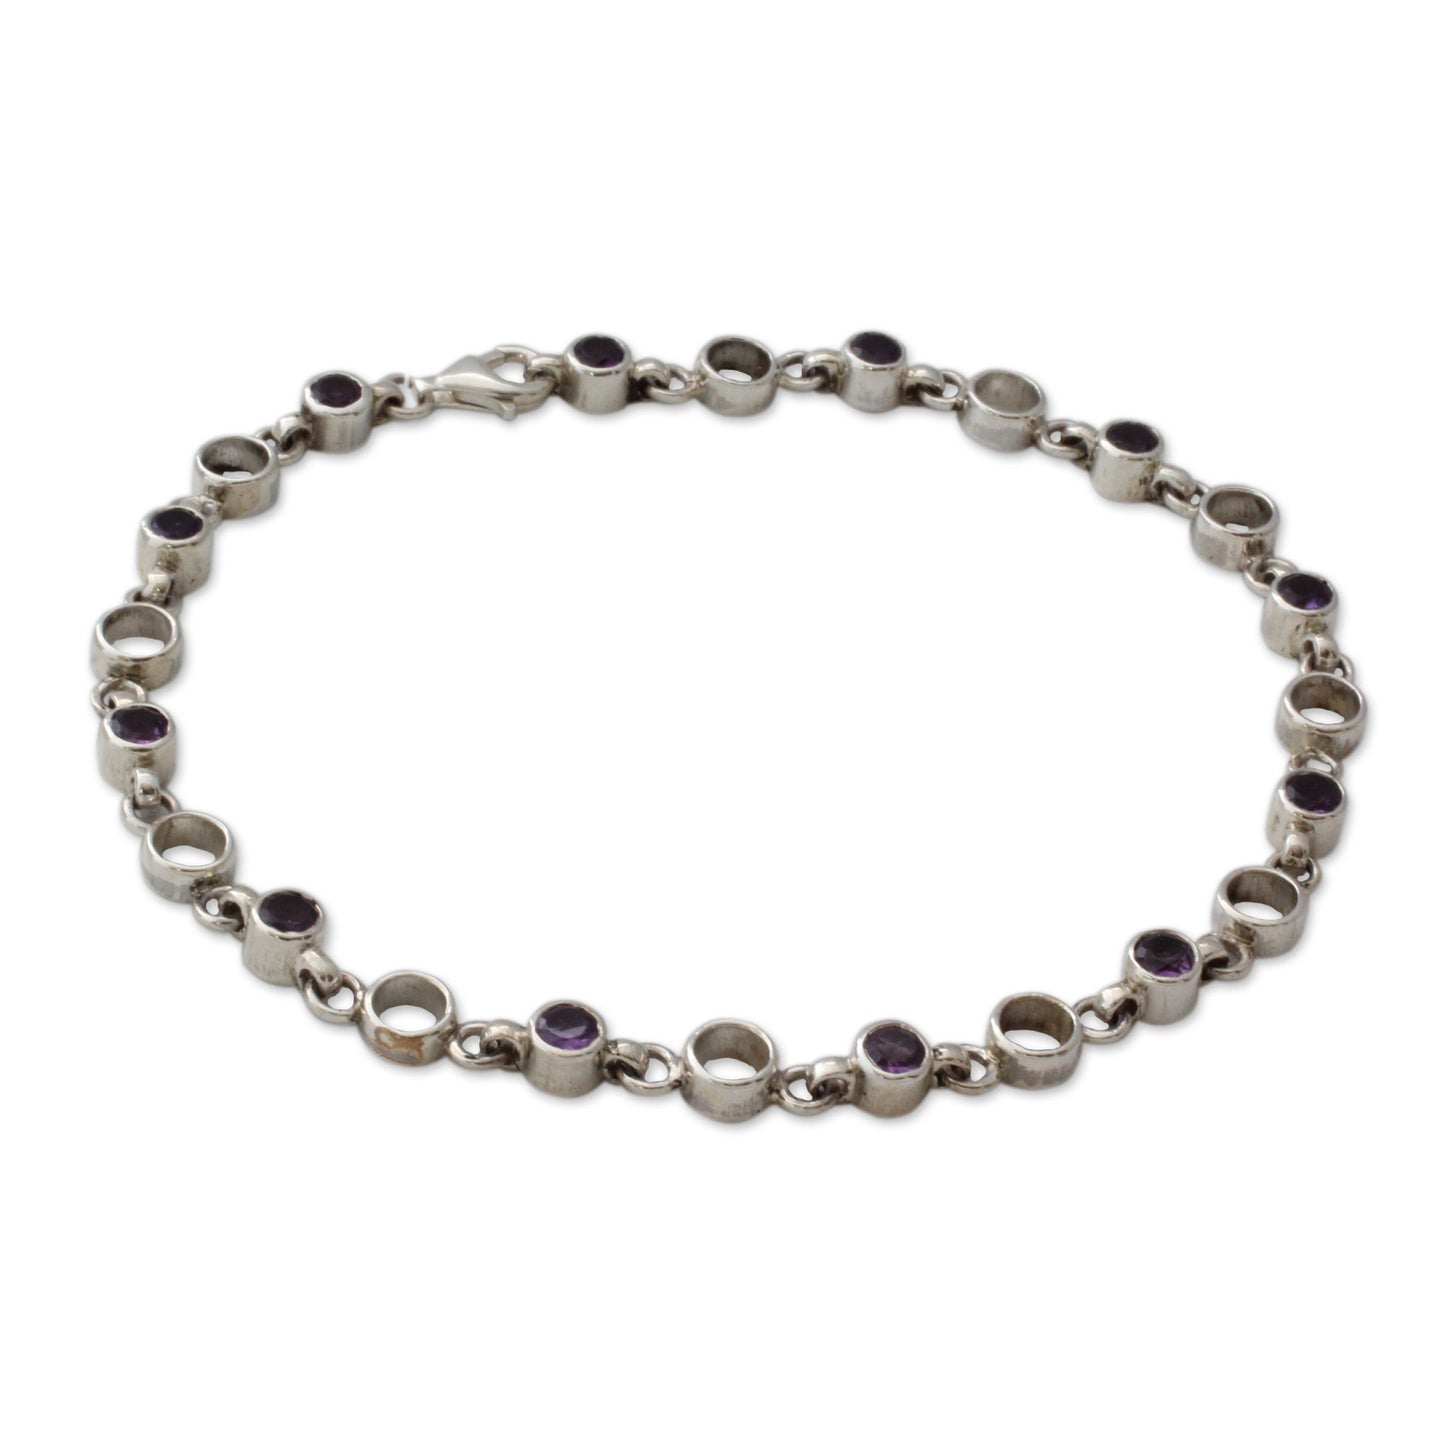 Elegant Simplicity Fair Trade Jewelry Amethyst Sterling Silver Anklet